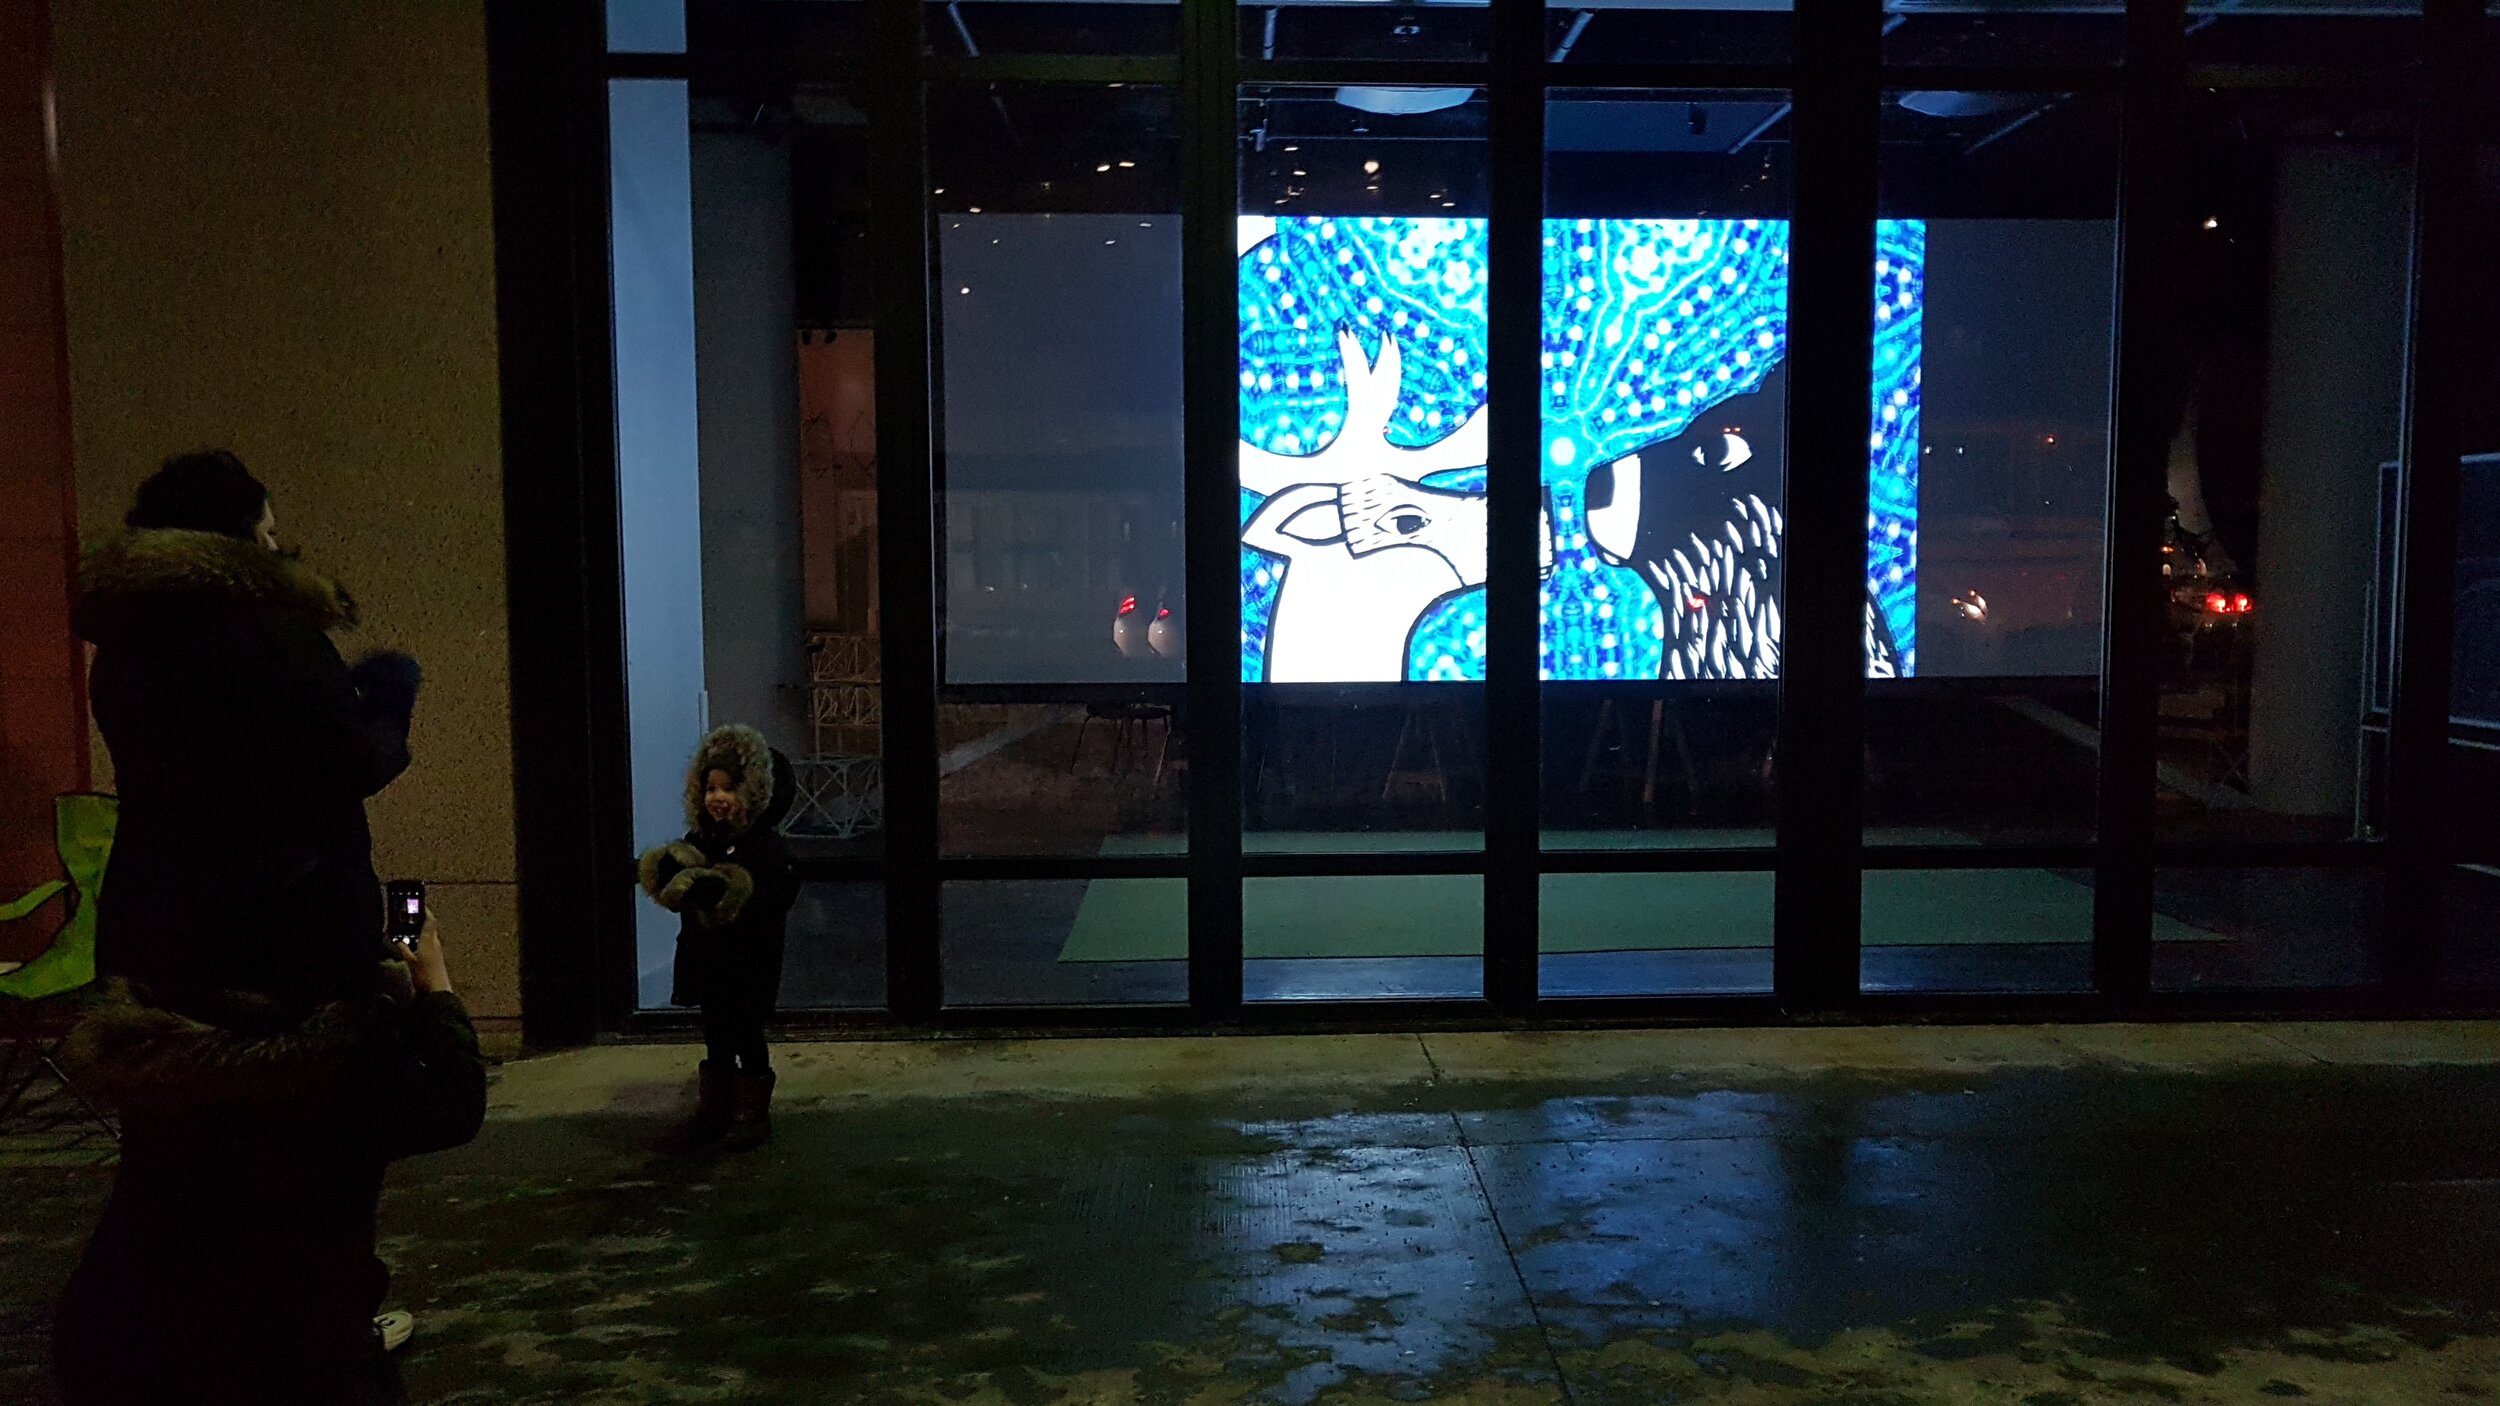  Glenn Gear,  From the Big Land  (2020), installed at 4th SPACE, Concordia University, Montreal QC. February 29, 2020. Photo by Glenn Gear. 